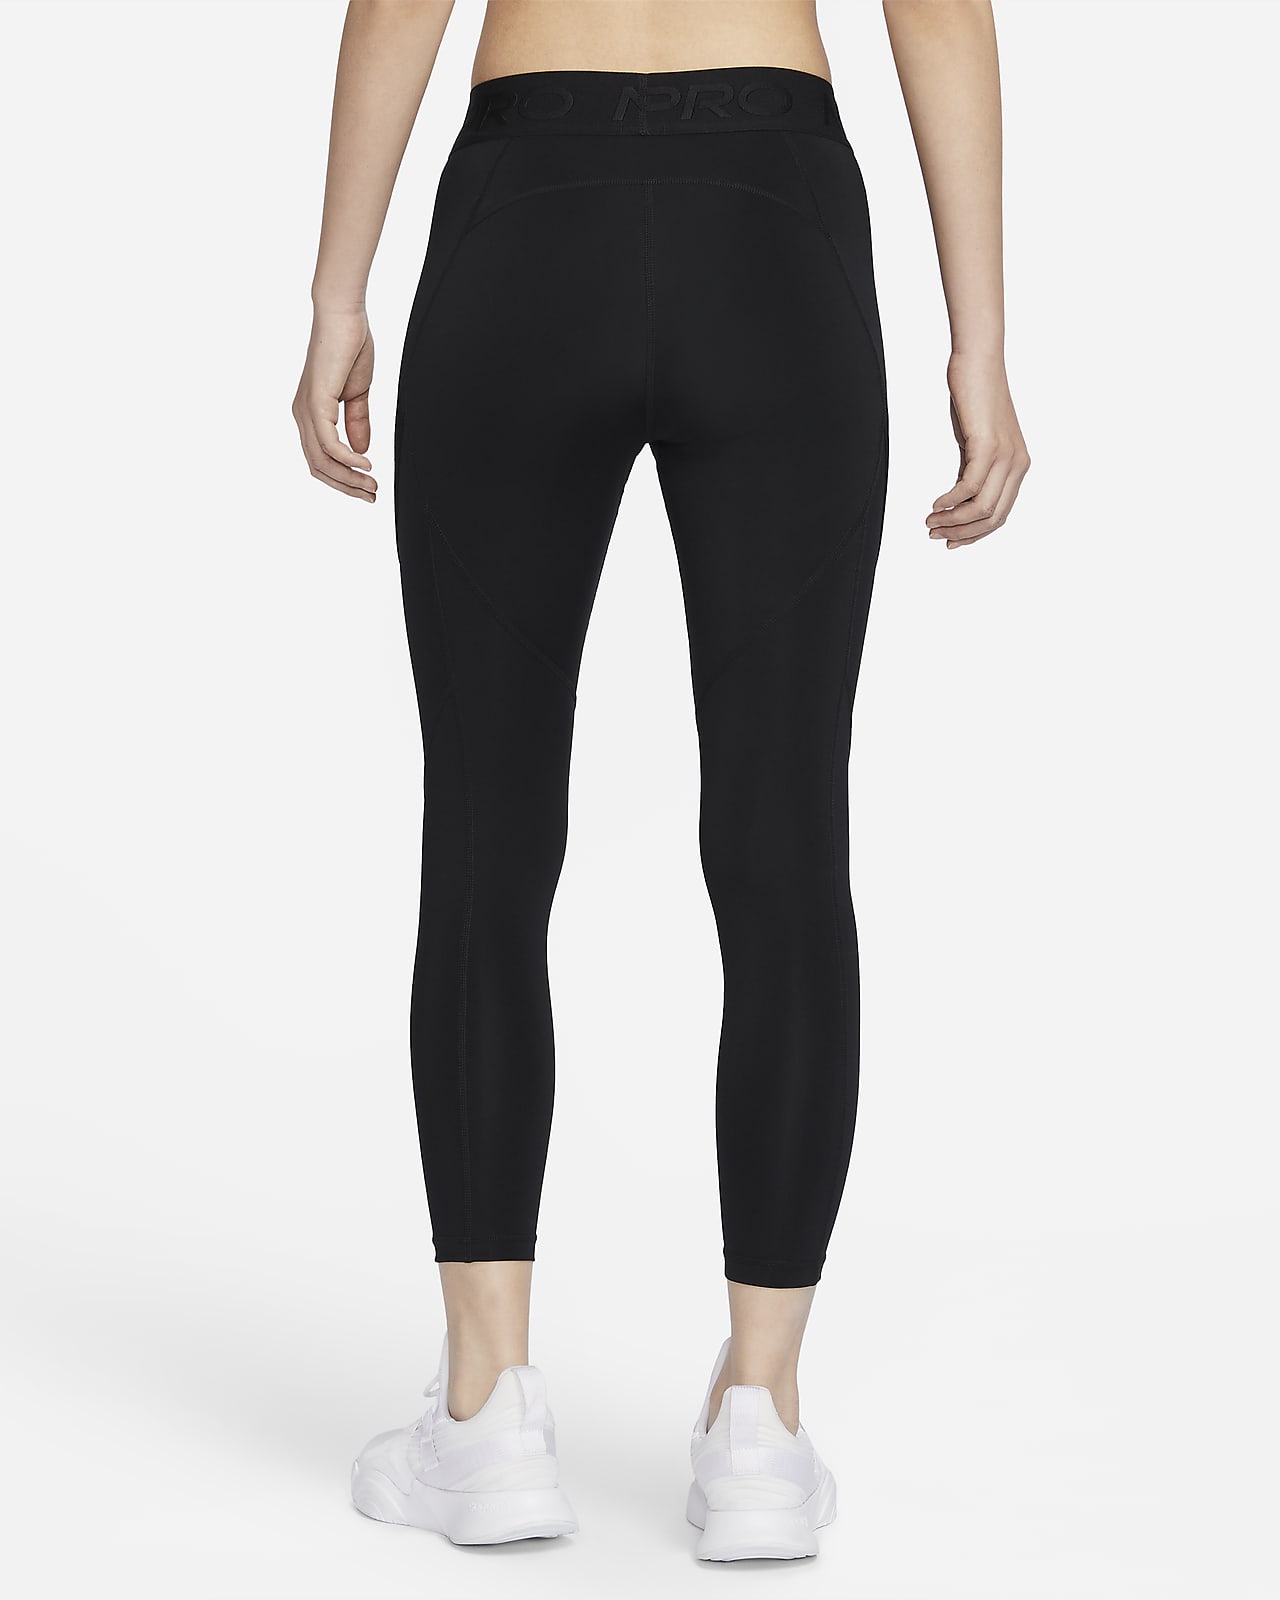 Nike Pro Women's Mid-Rise 7/8 Leggings with Pockets. Nike IN